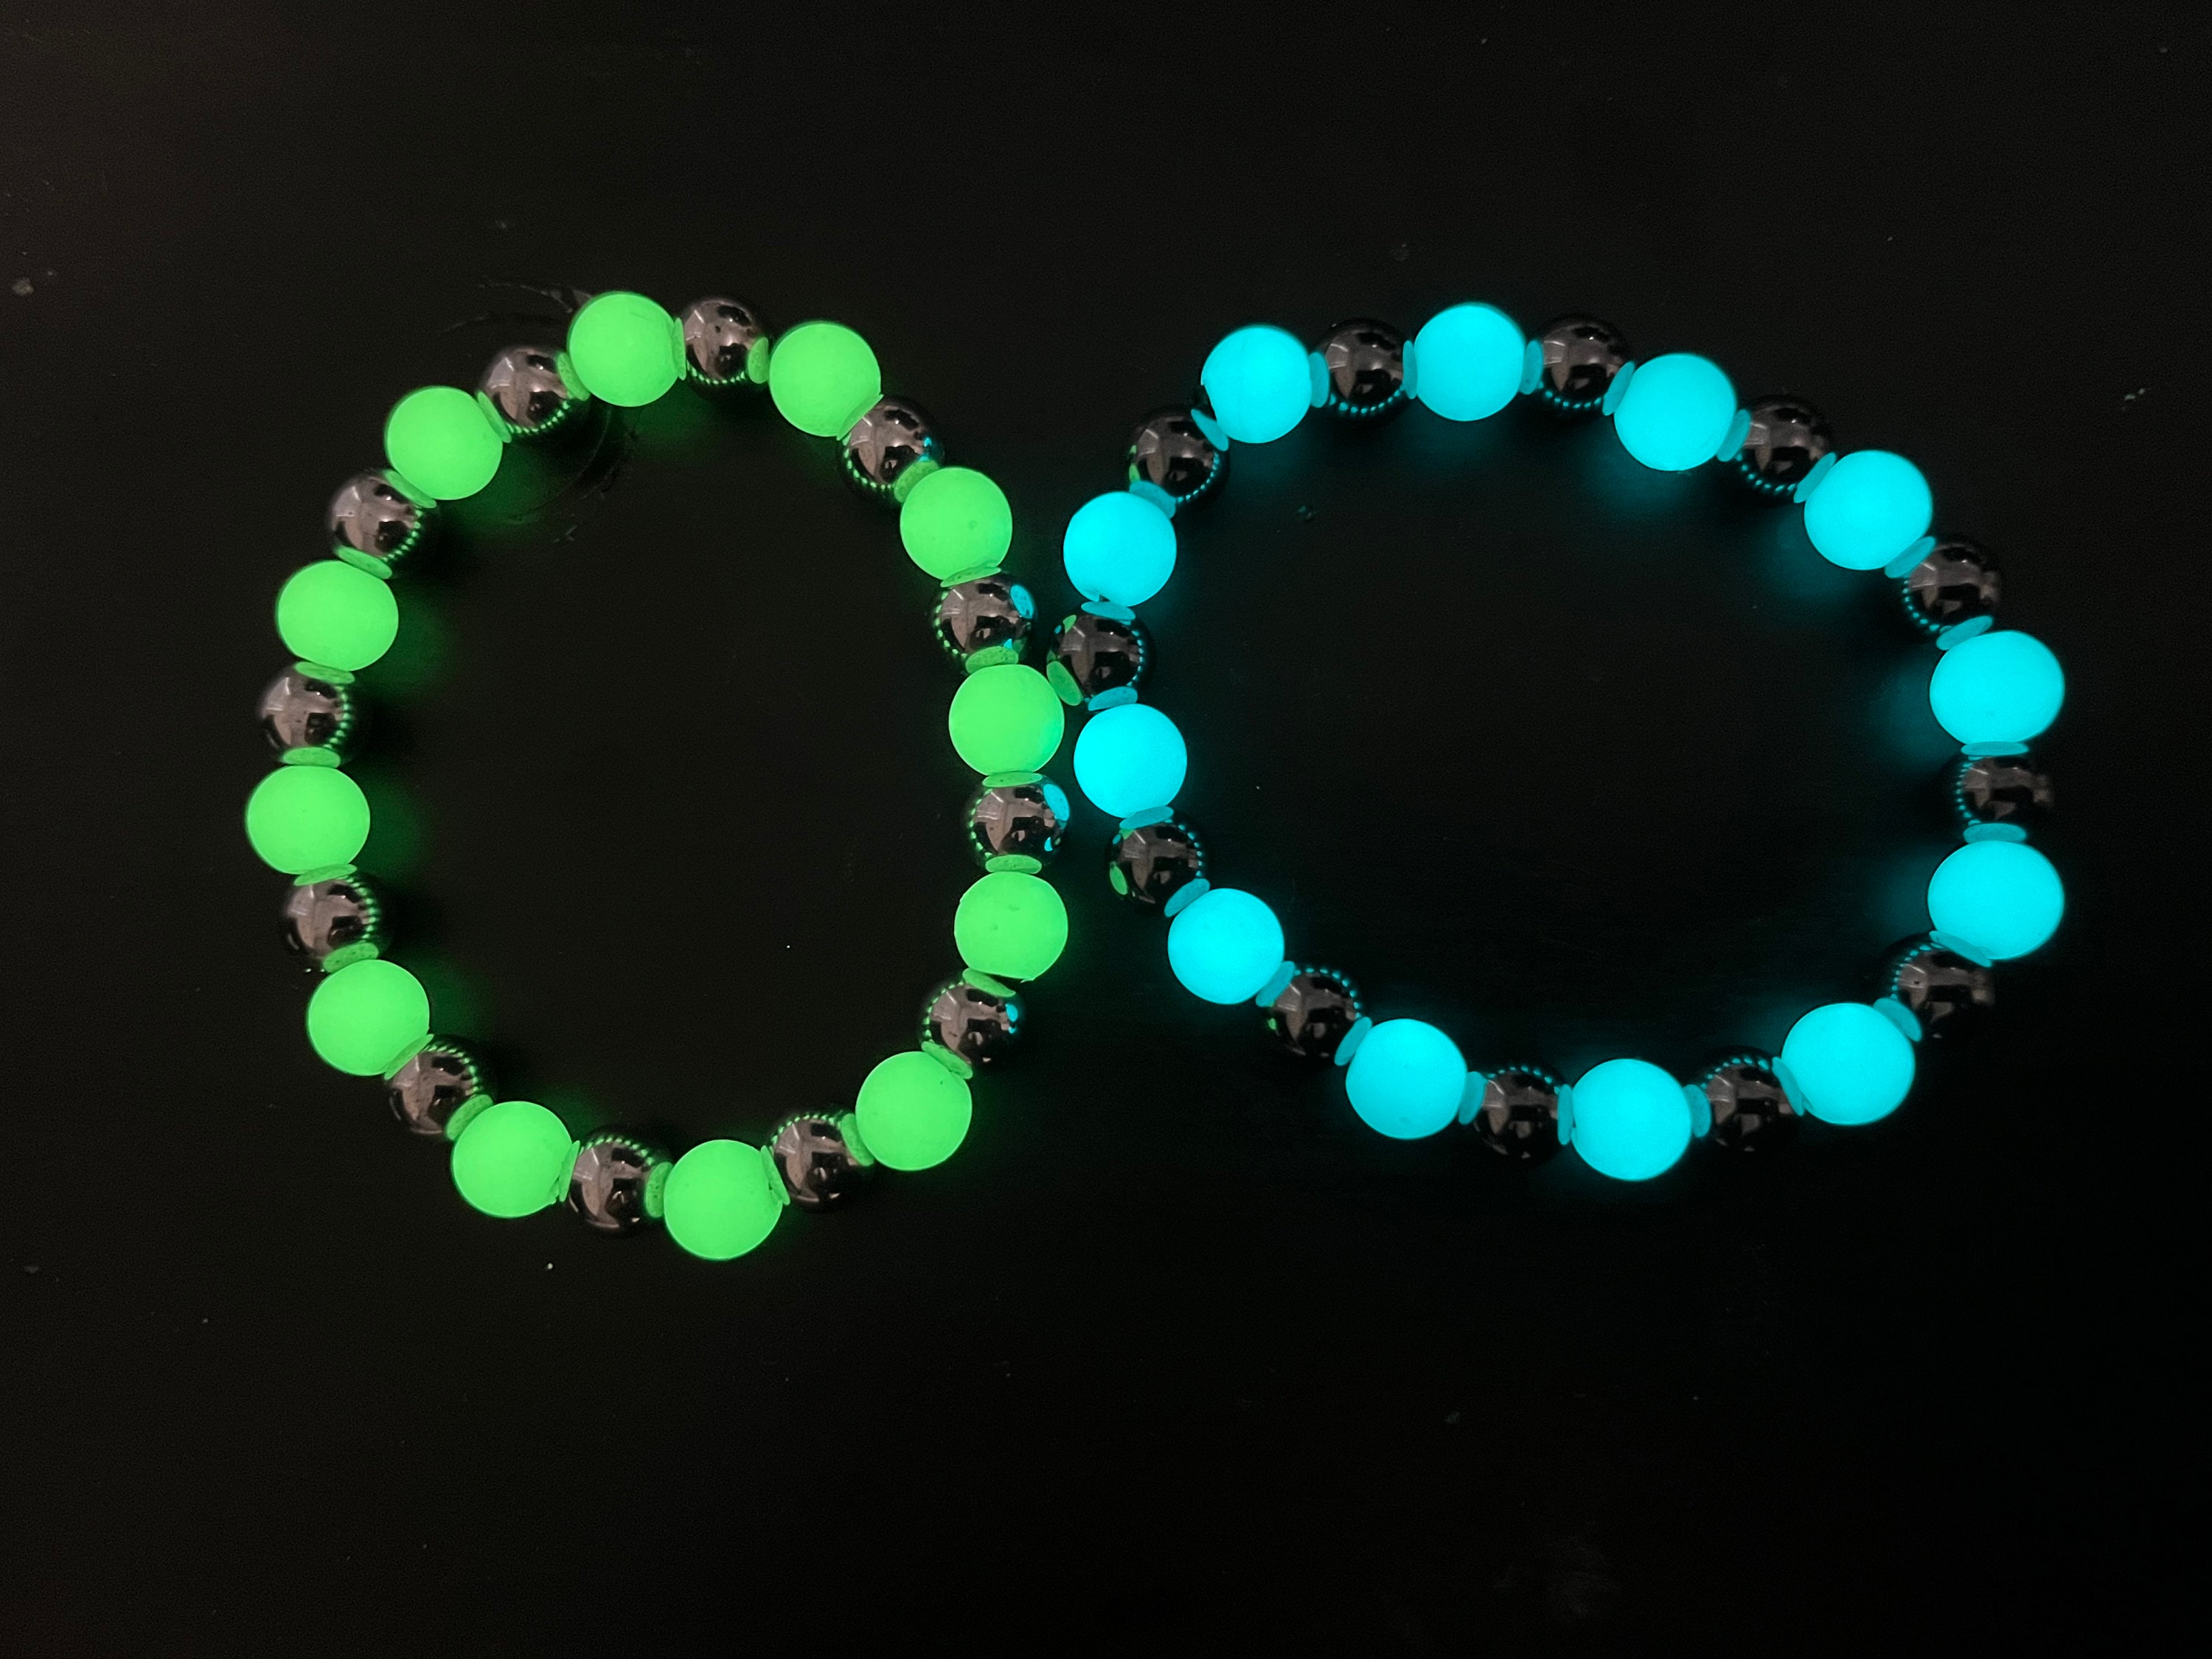 Glow in the Dark Navy Blue, Teal, and White Rubber Band Bracelet